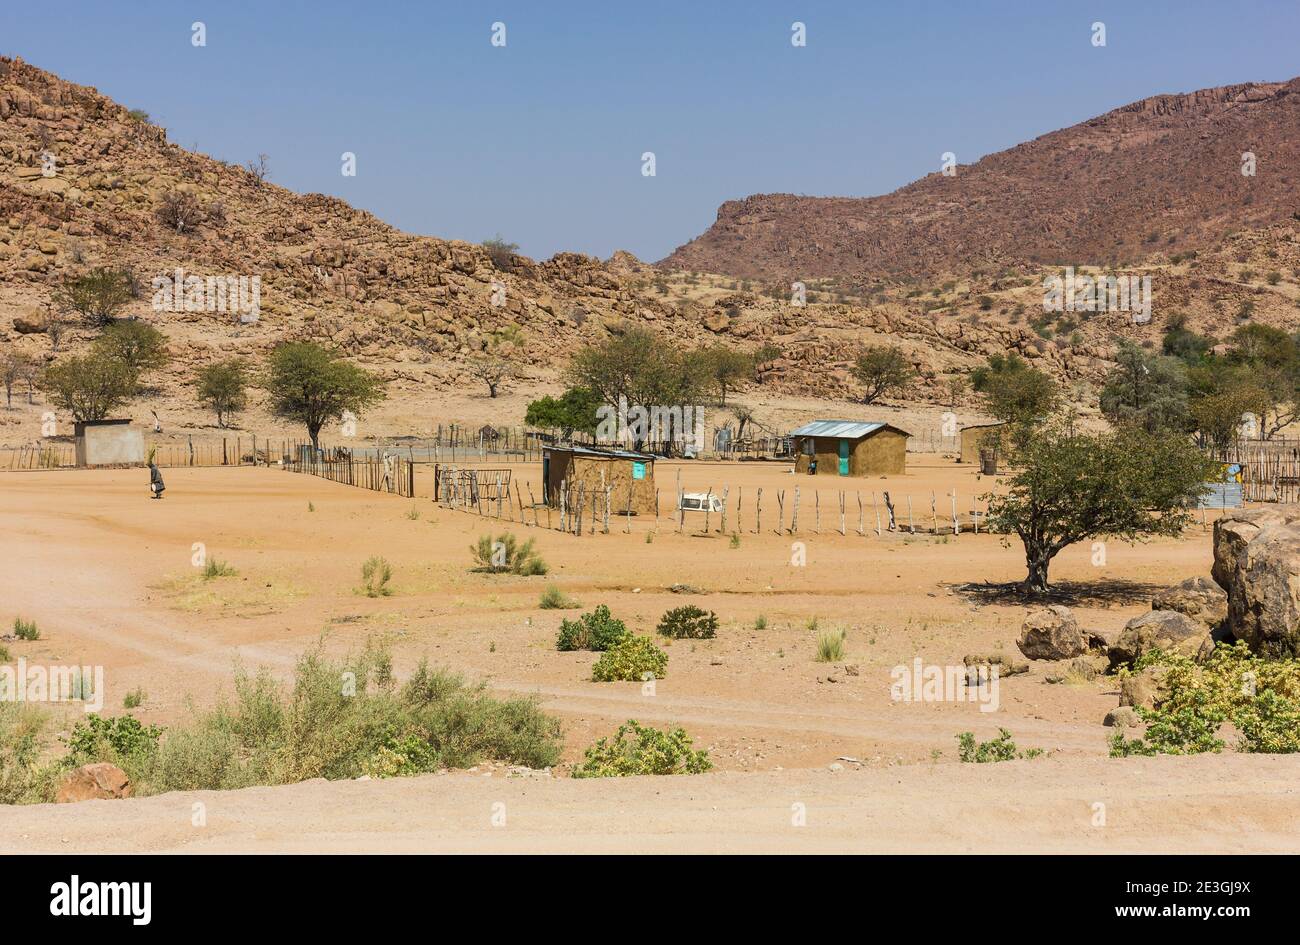 rural landscape scene in Namibia interior consisting of clay huts and a small fenced area Stock Photo